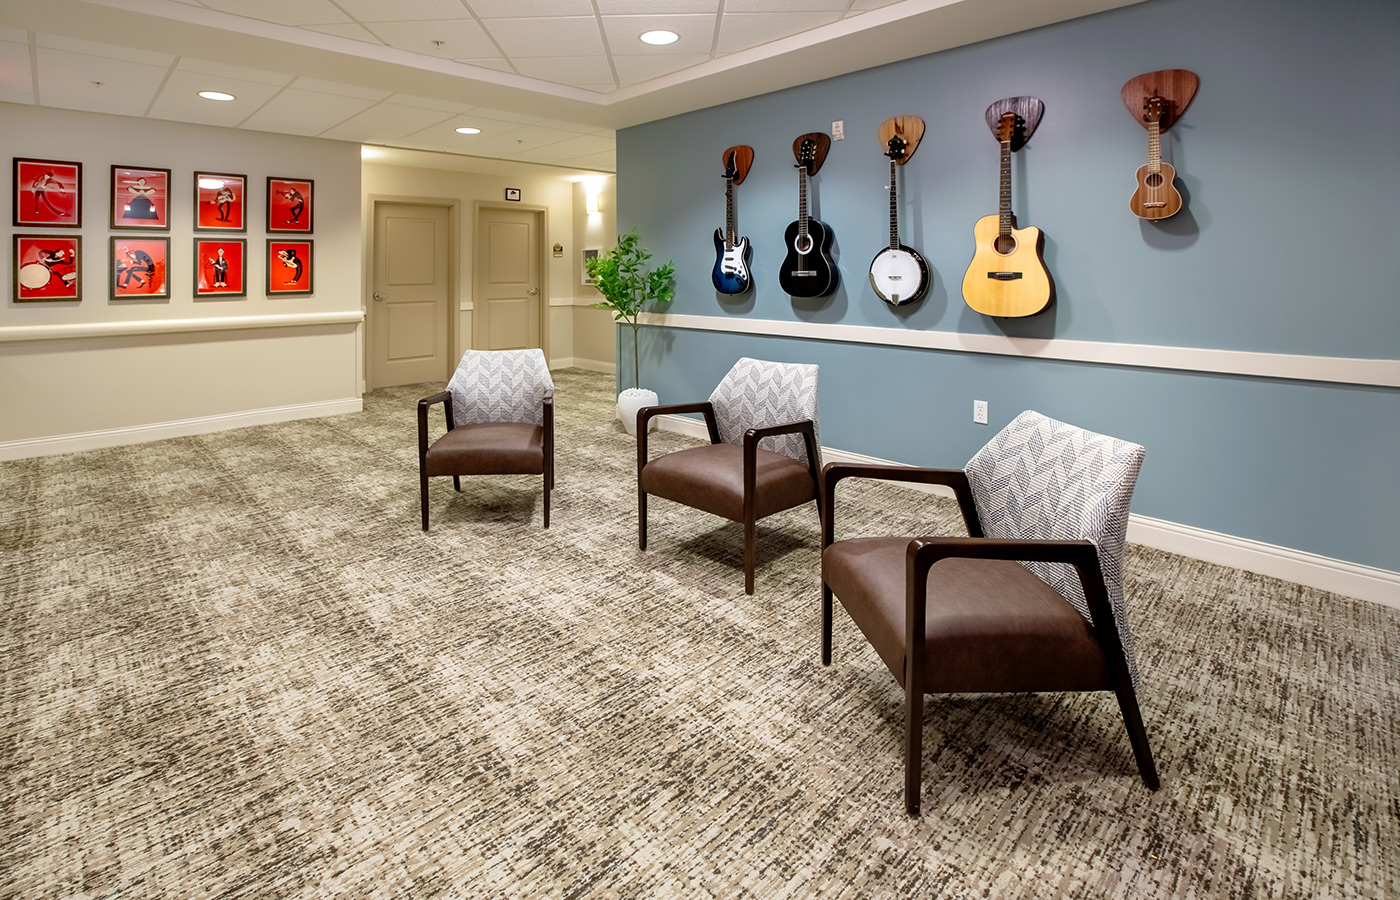 A music area with chairs and guitars on the wall.